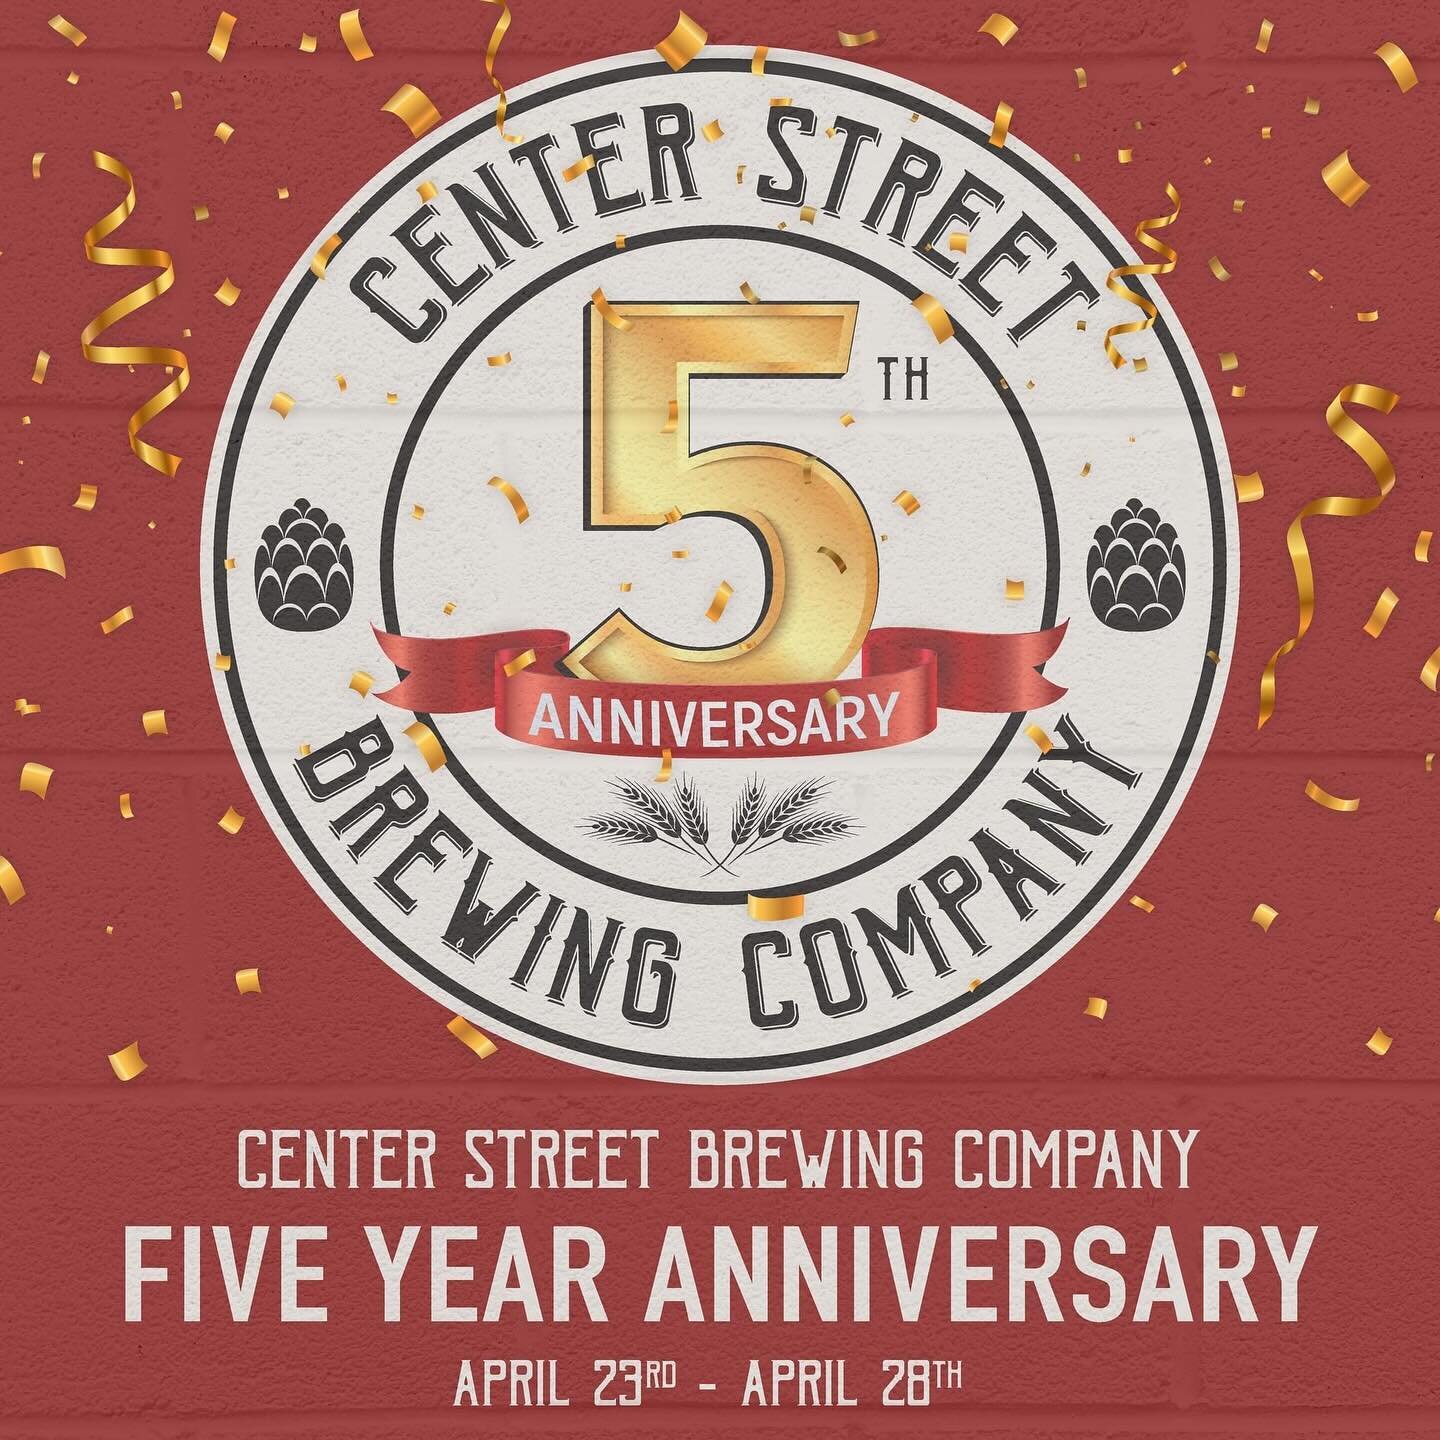 Center Street Brewing Company is celebrating 5 years of beer! Join us for a weekend of festivities for our 5th Anniversary! Since 2019, we have strived to provide quality craft beer to our community in a welcoming environment and we continue to work 